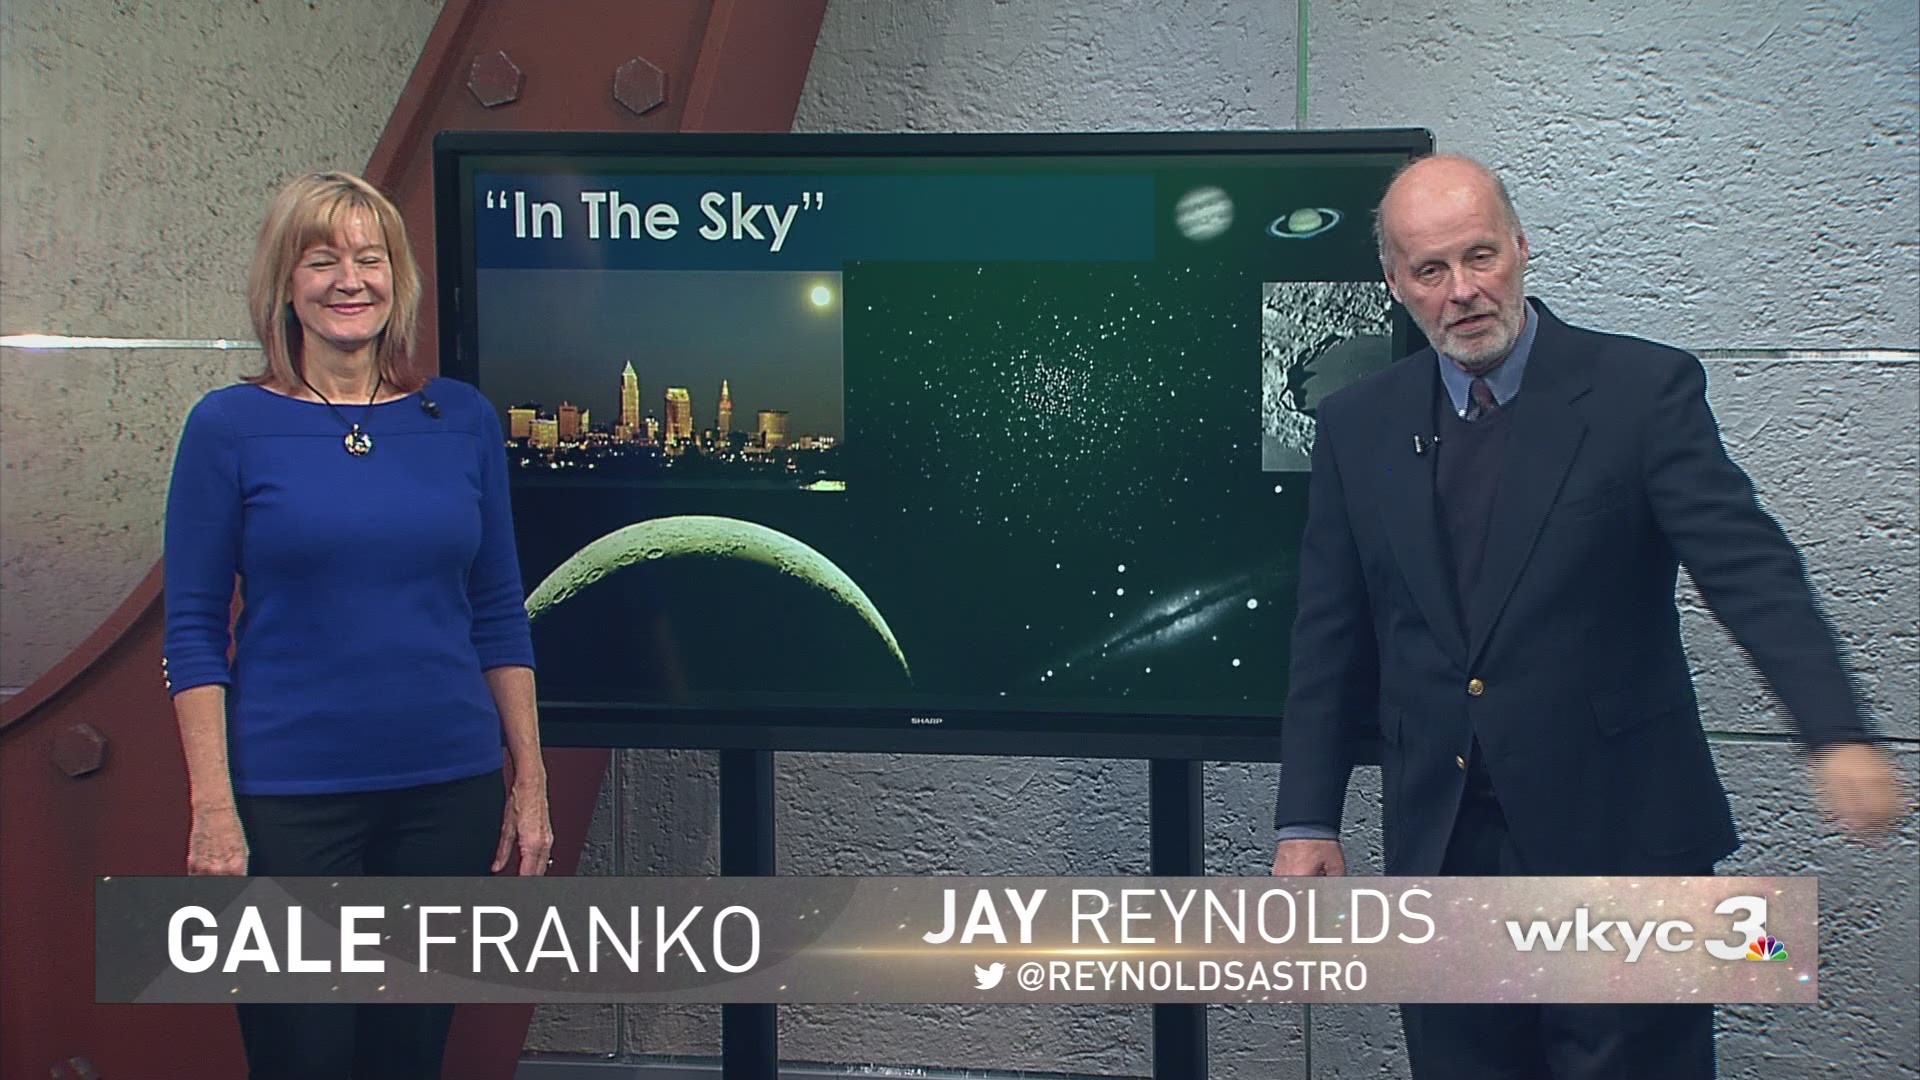 The Hubble Space Telescope has been in the news lately. Jay Reynolds (@reynoldsastro) and Gale Franko from the Cuyahoga Astronomical Association (@CuyAstro) share some interesting facts about Hubble and answer a viewers question. #3weather